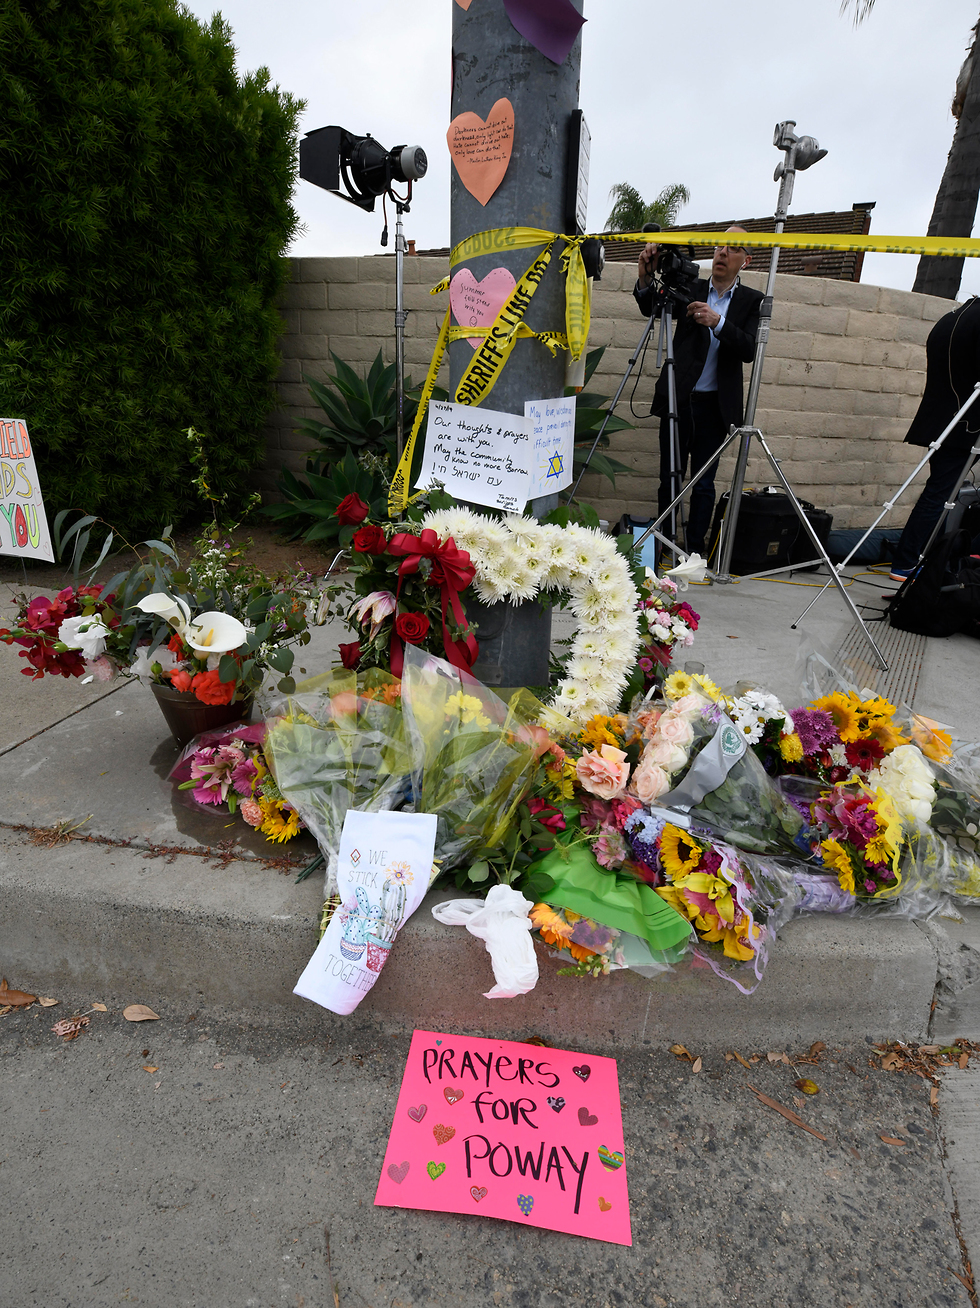 Local residents express support for local Jewish community after the synagogue shooting (Photo: AP)